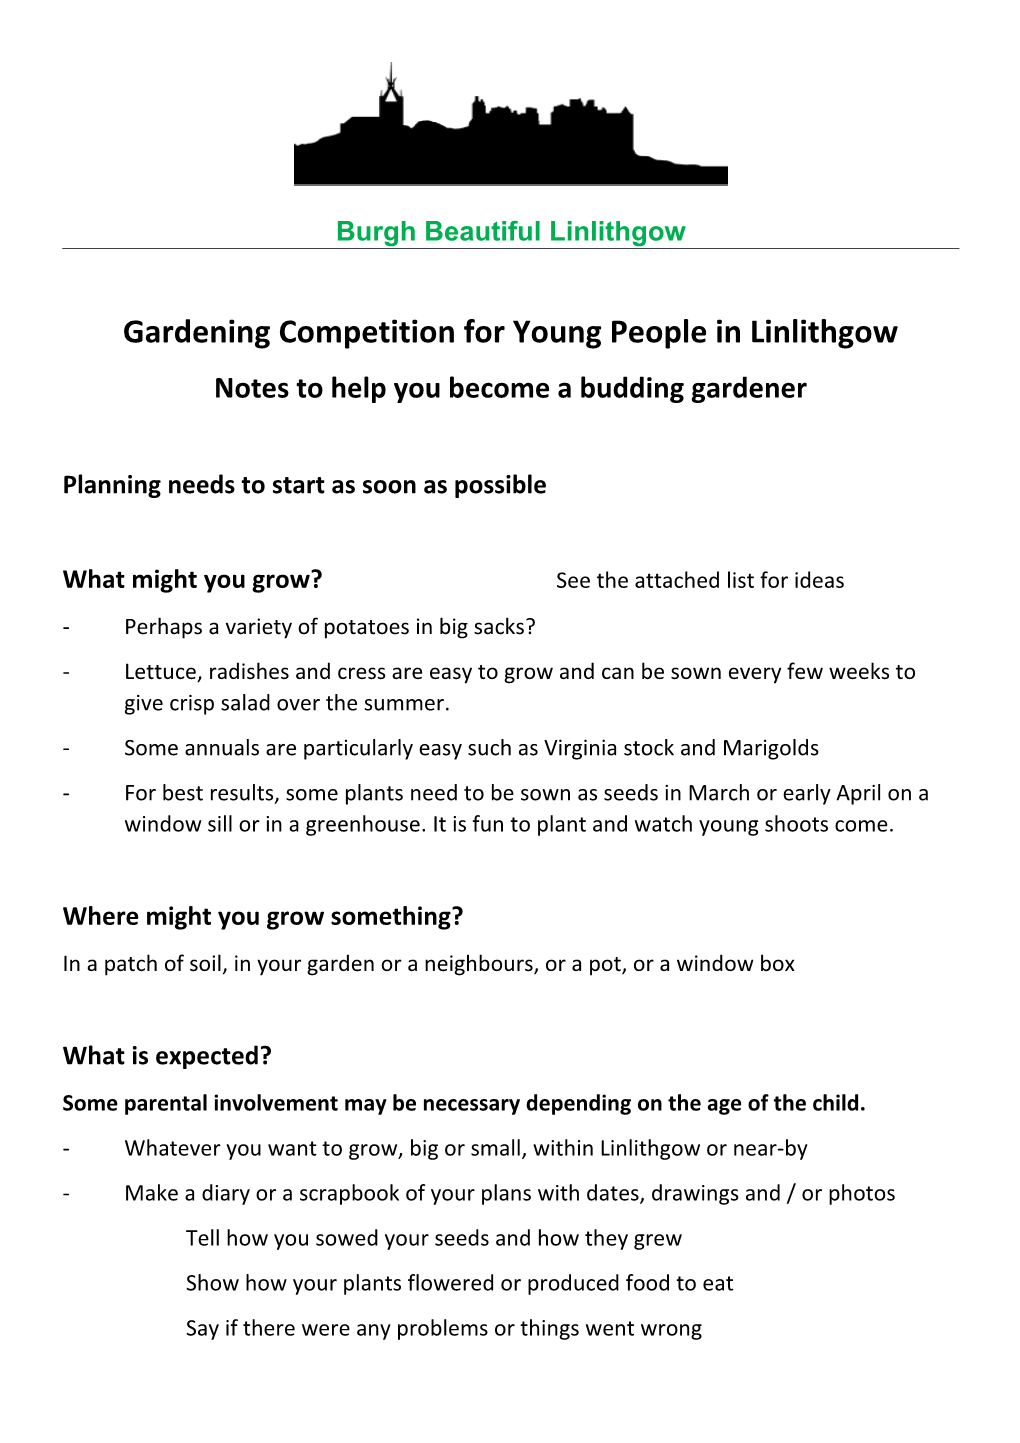 Gardening Competition for Young People in Linlithgow